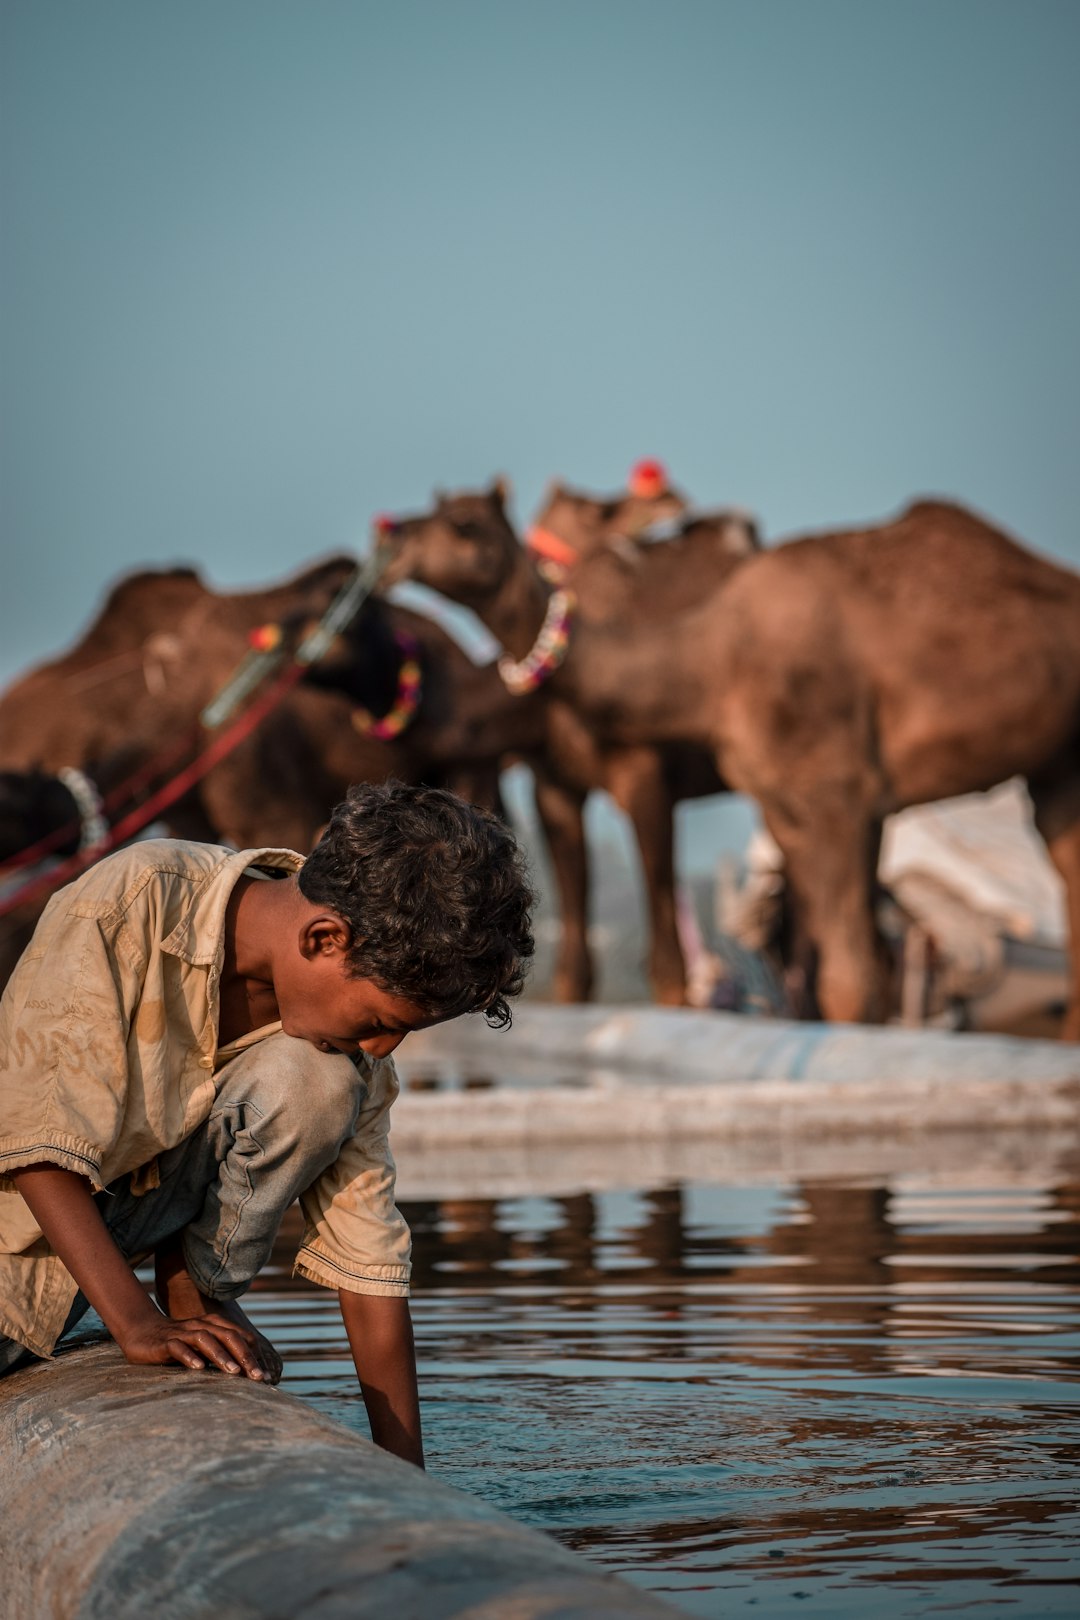 Travel Tips and Stories of Pushkar in India